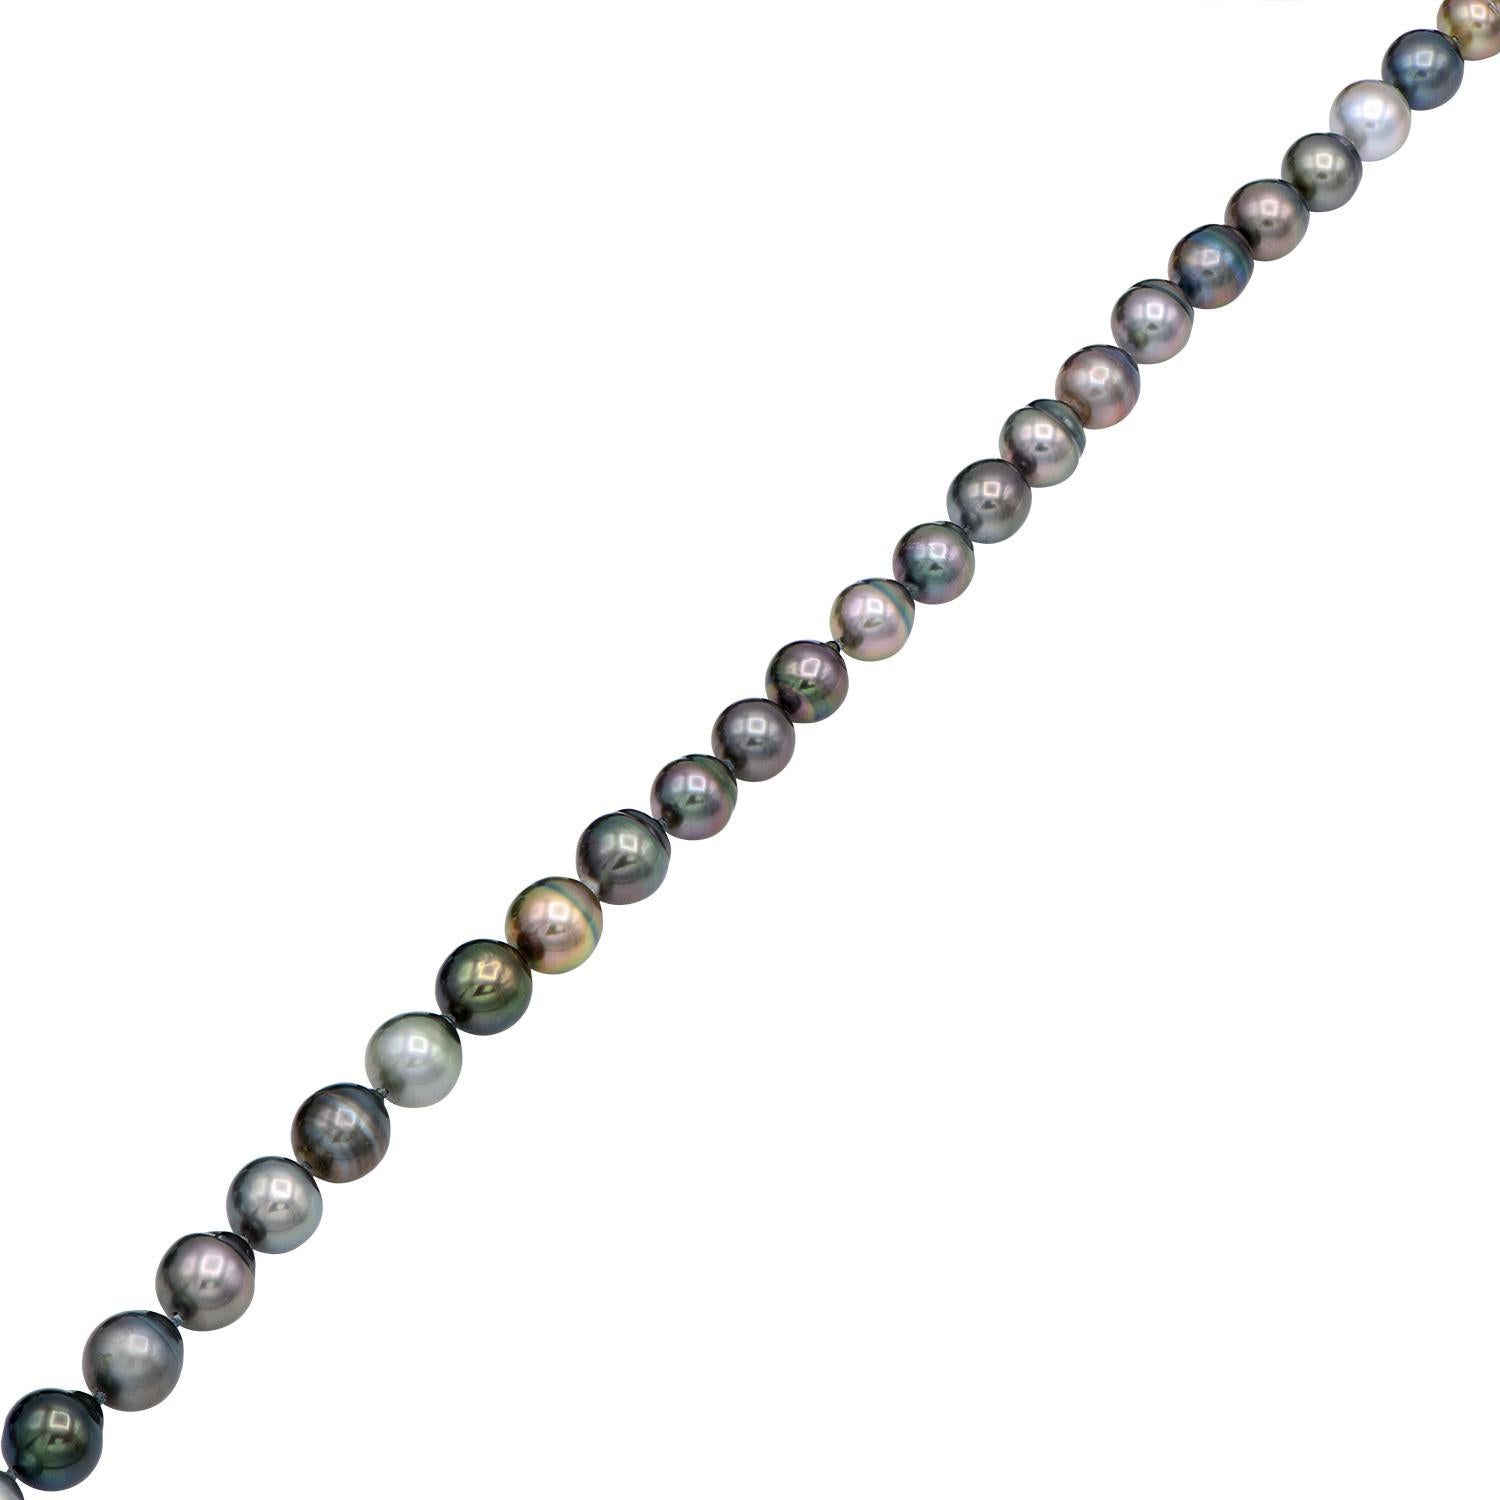 This beautiful baroque Tahitian pearl necklace is made from 11-12mm baroque multicolor Tahitian pearls. Every pearl has its own unique color and shape which makes it a truly special necklace. The pearls are strung with a double knot between each